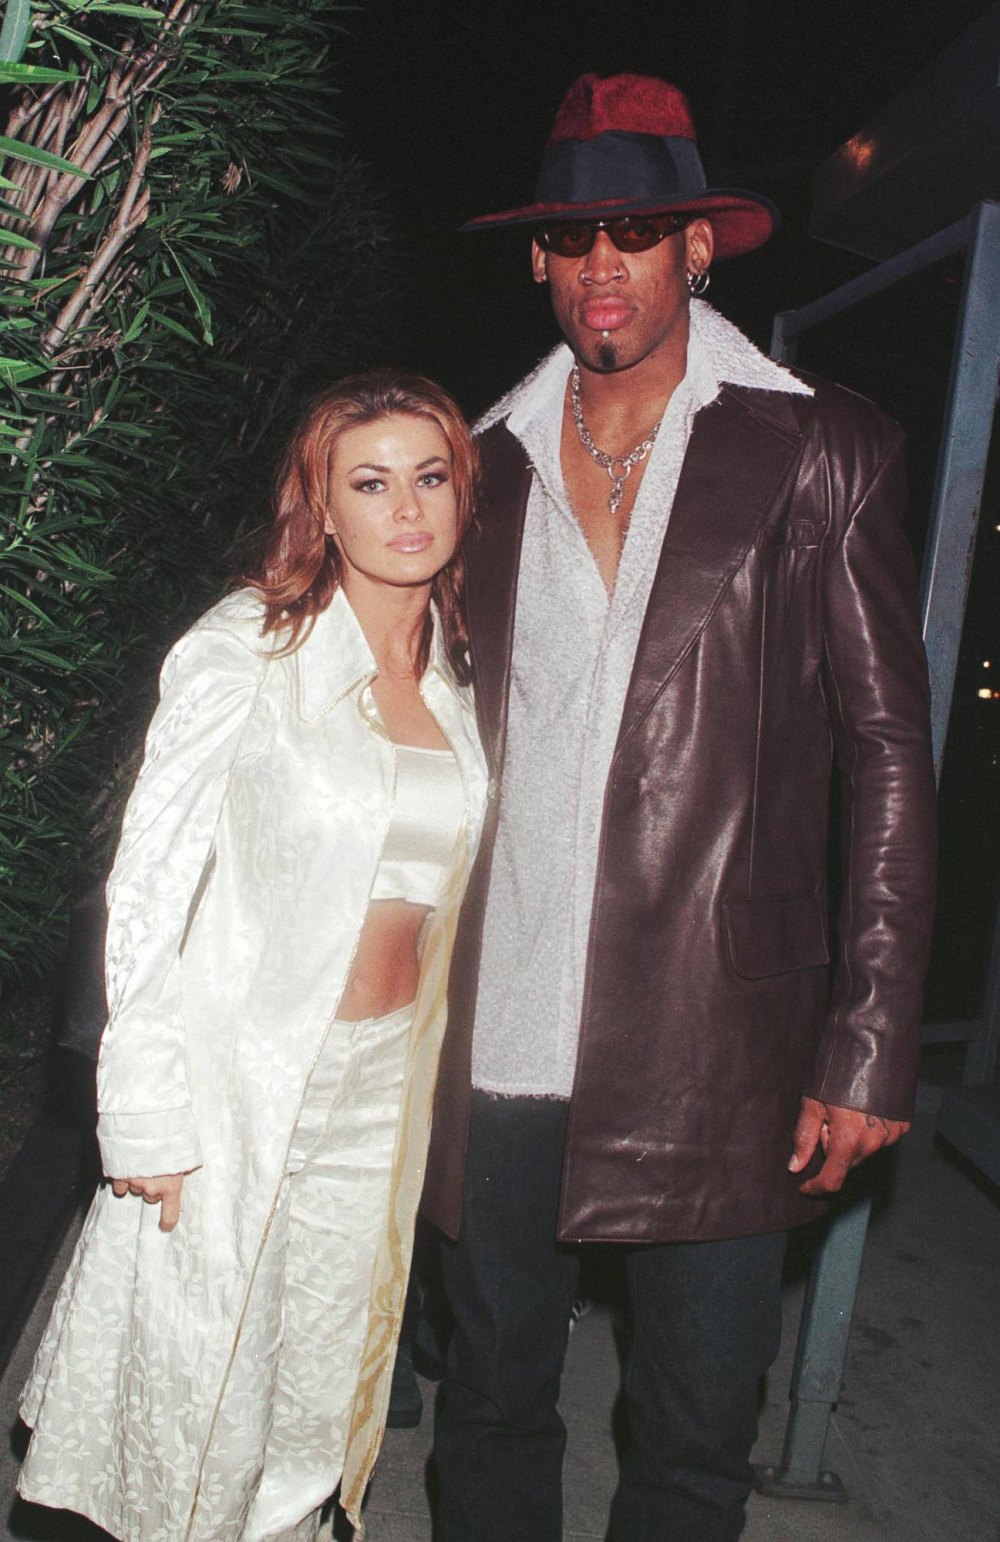 Gerry Turner and Theresa Nist Aren t Alone 11 Celebrity Couples Who Were Married Less Than 100 Days 658 Carmen Electra and Dennis Rodman